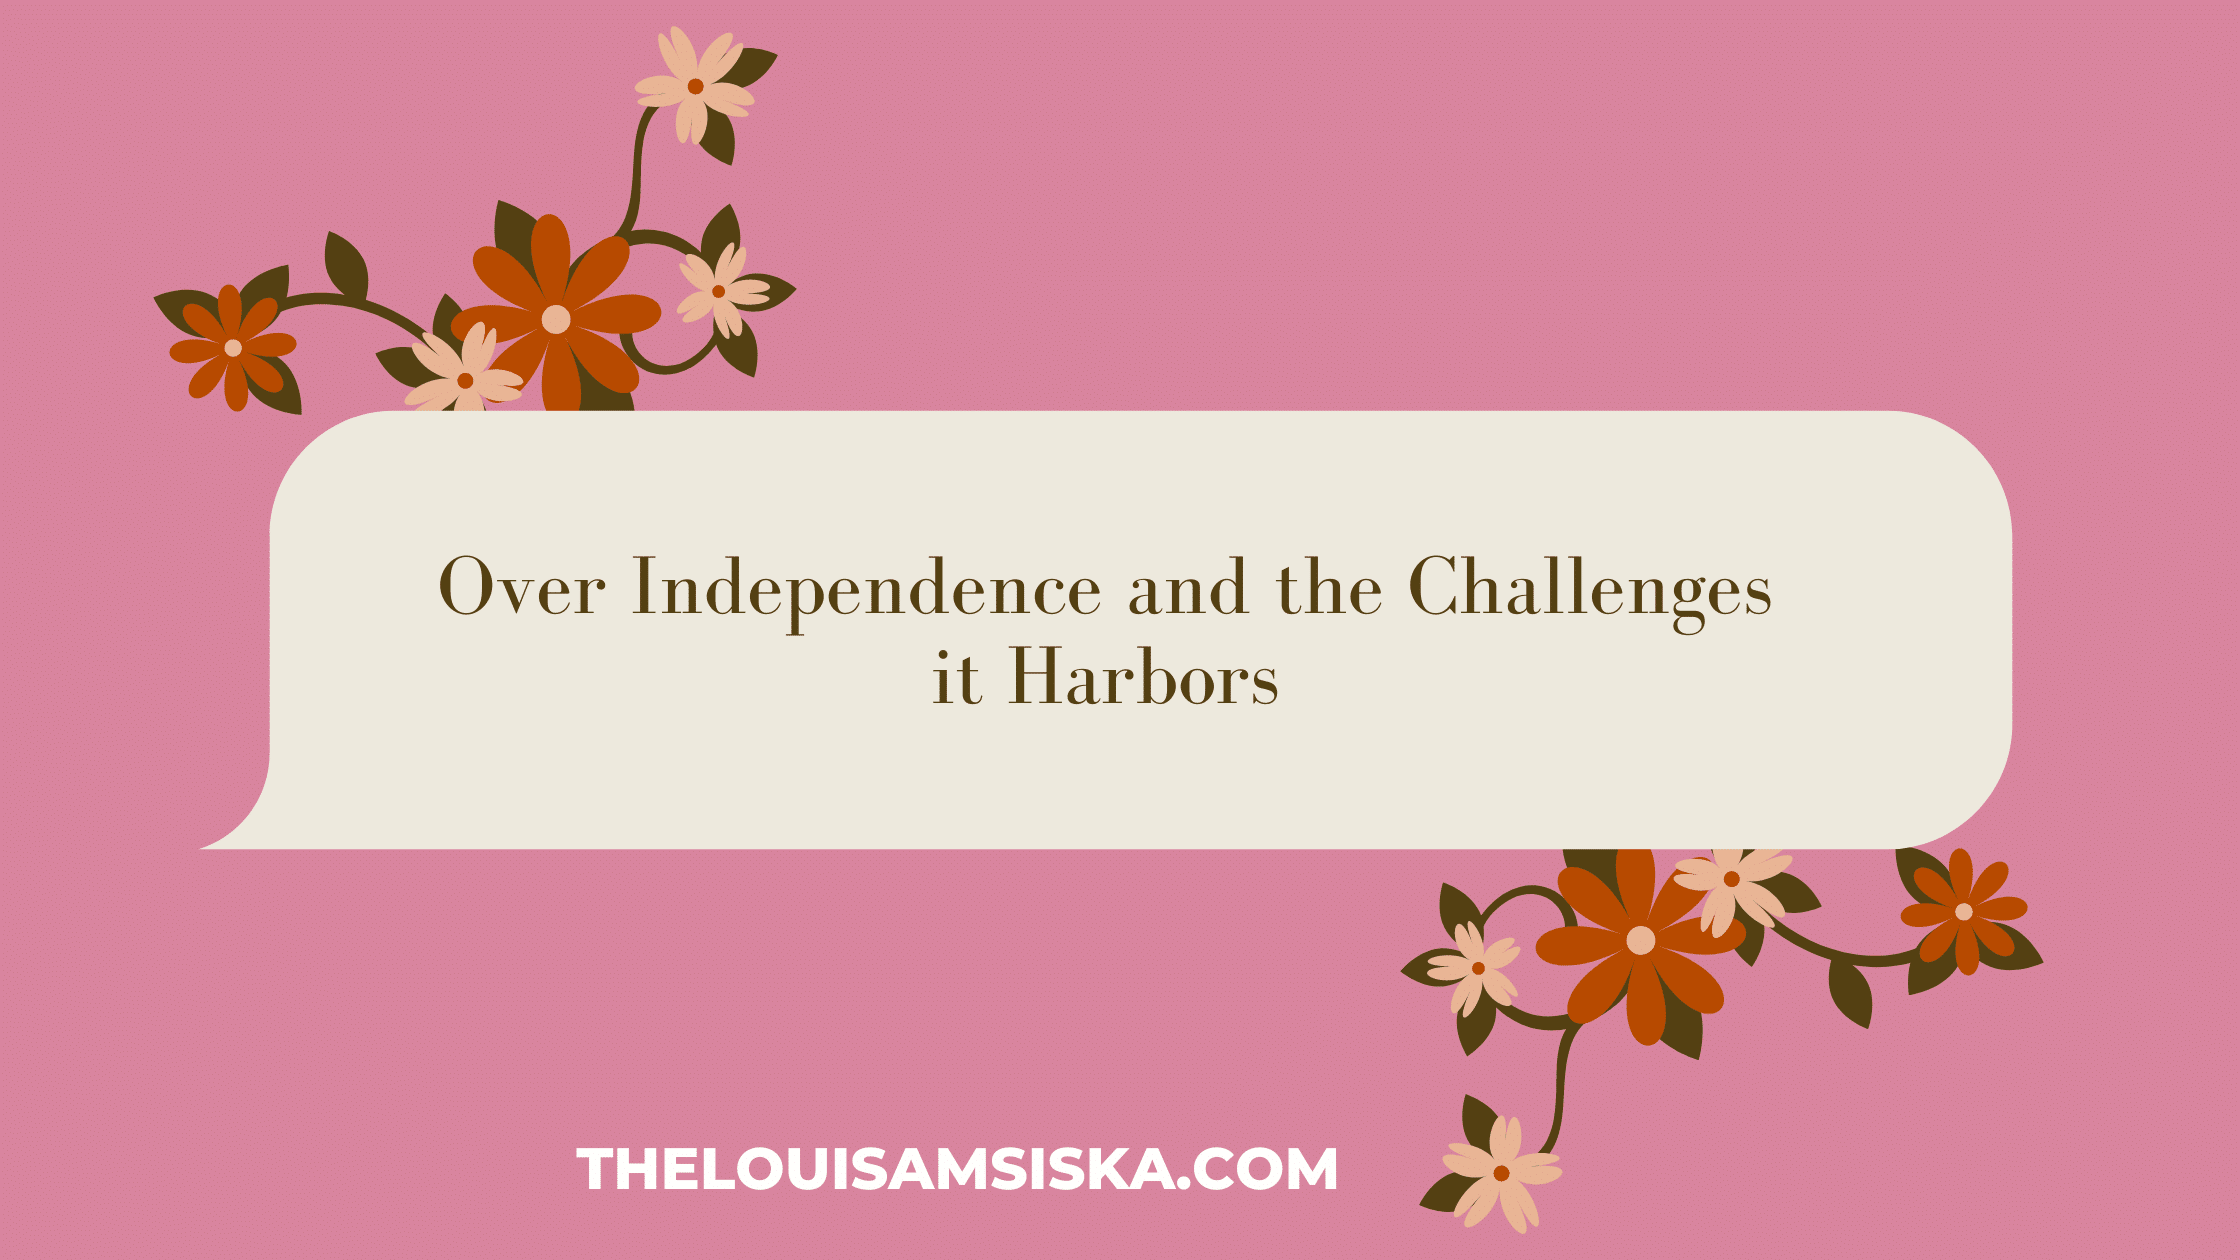 Over Independence and the Dangers it Harbors